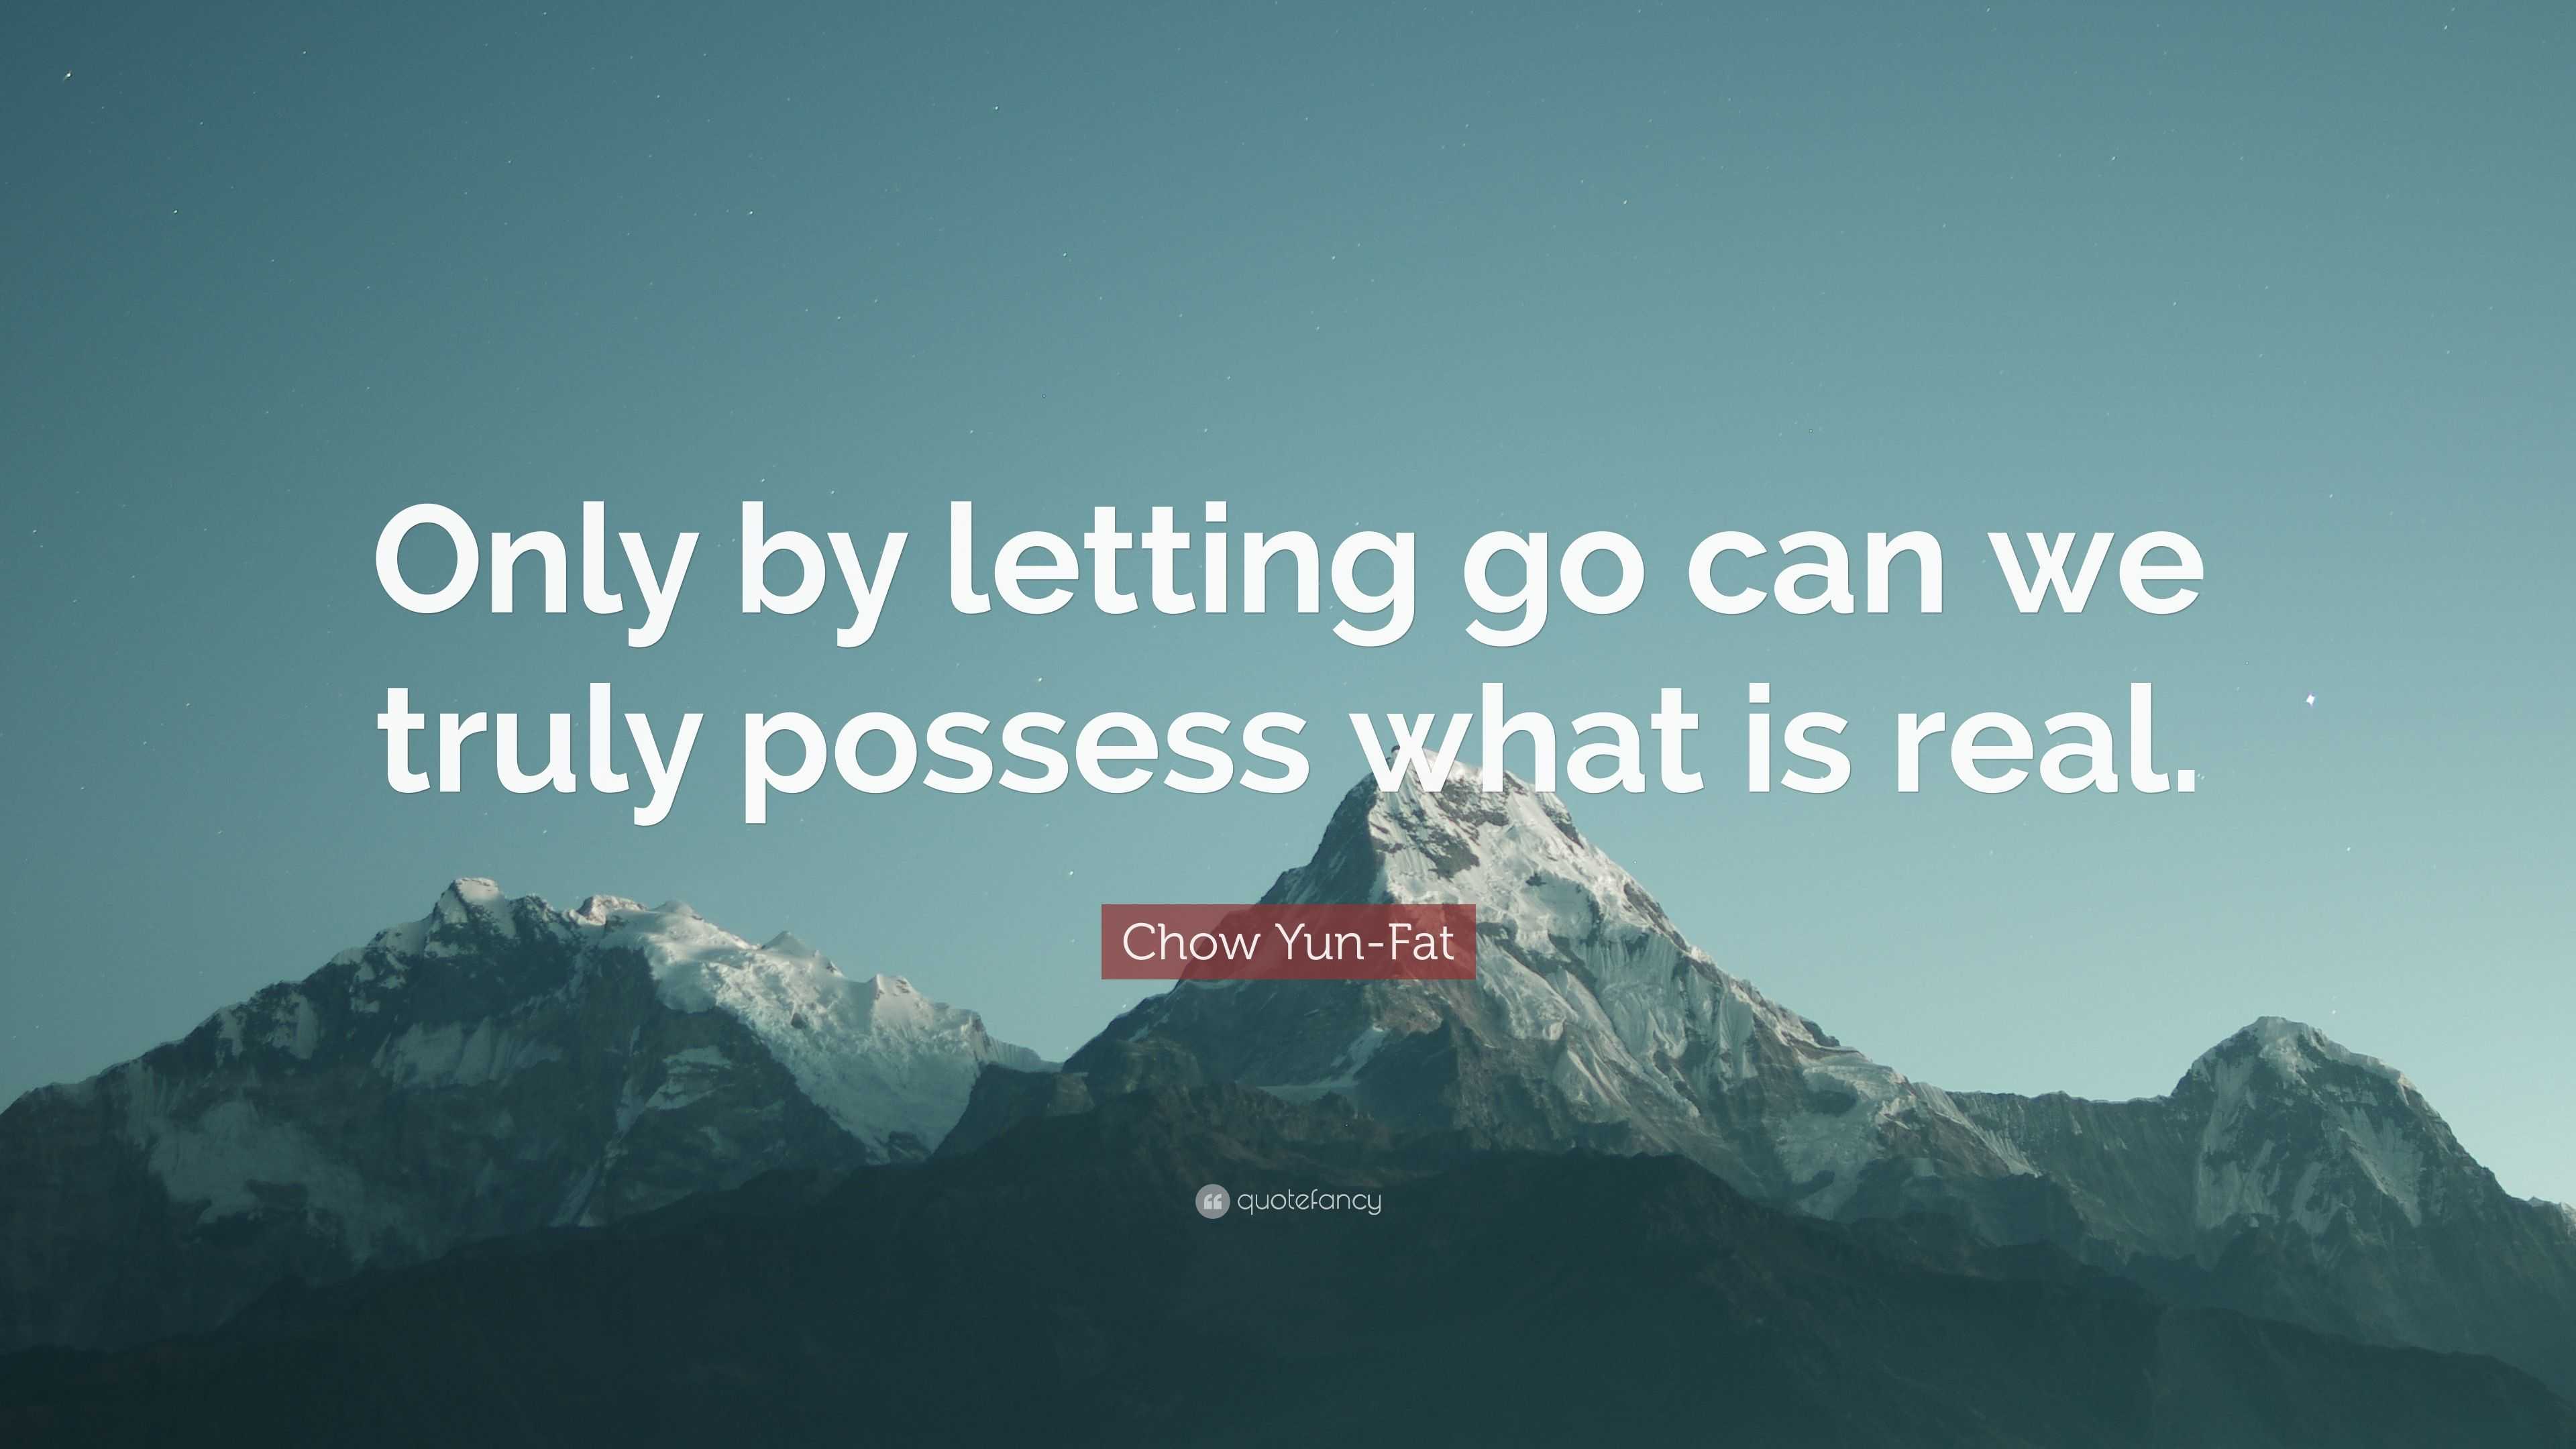 Chow Yun-Fat Quote: “Only by letting go can we truly possess what is real.”